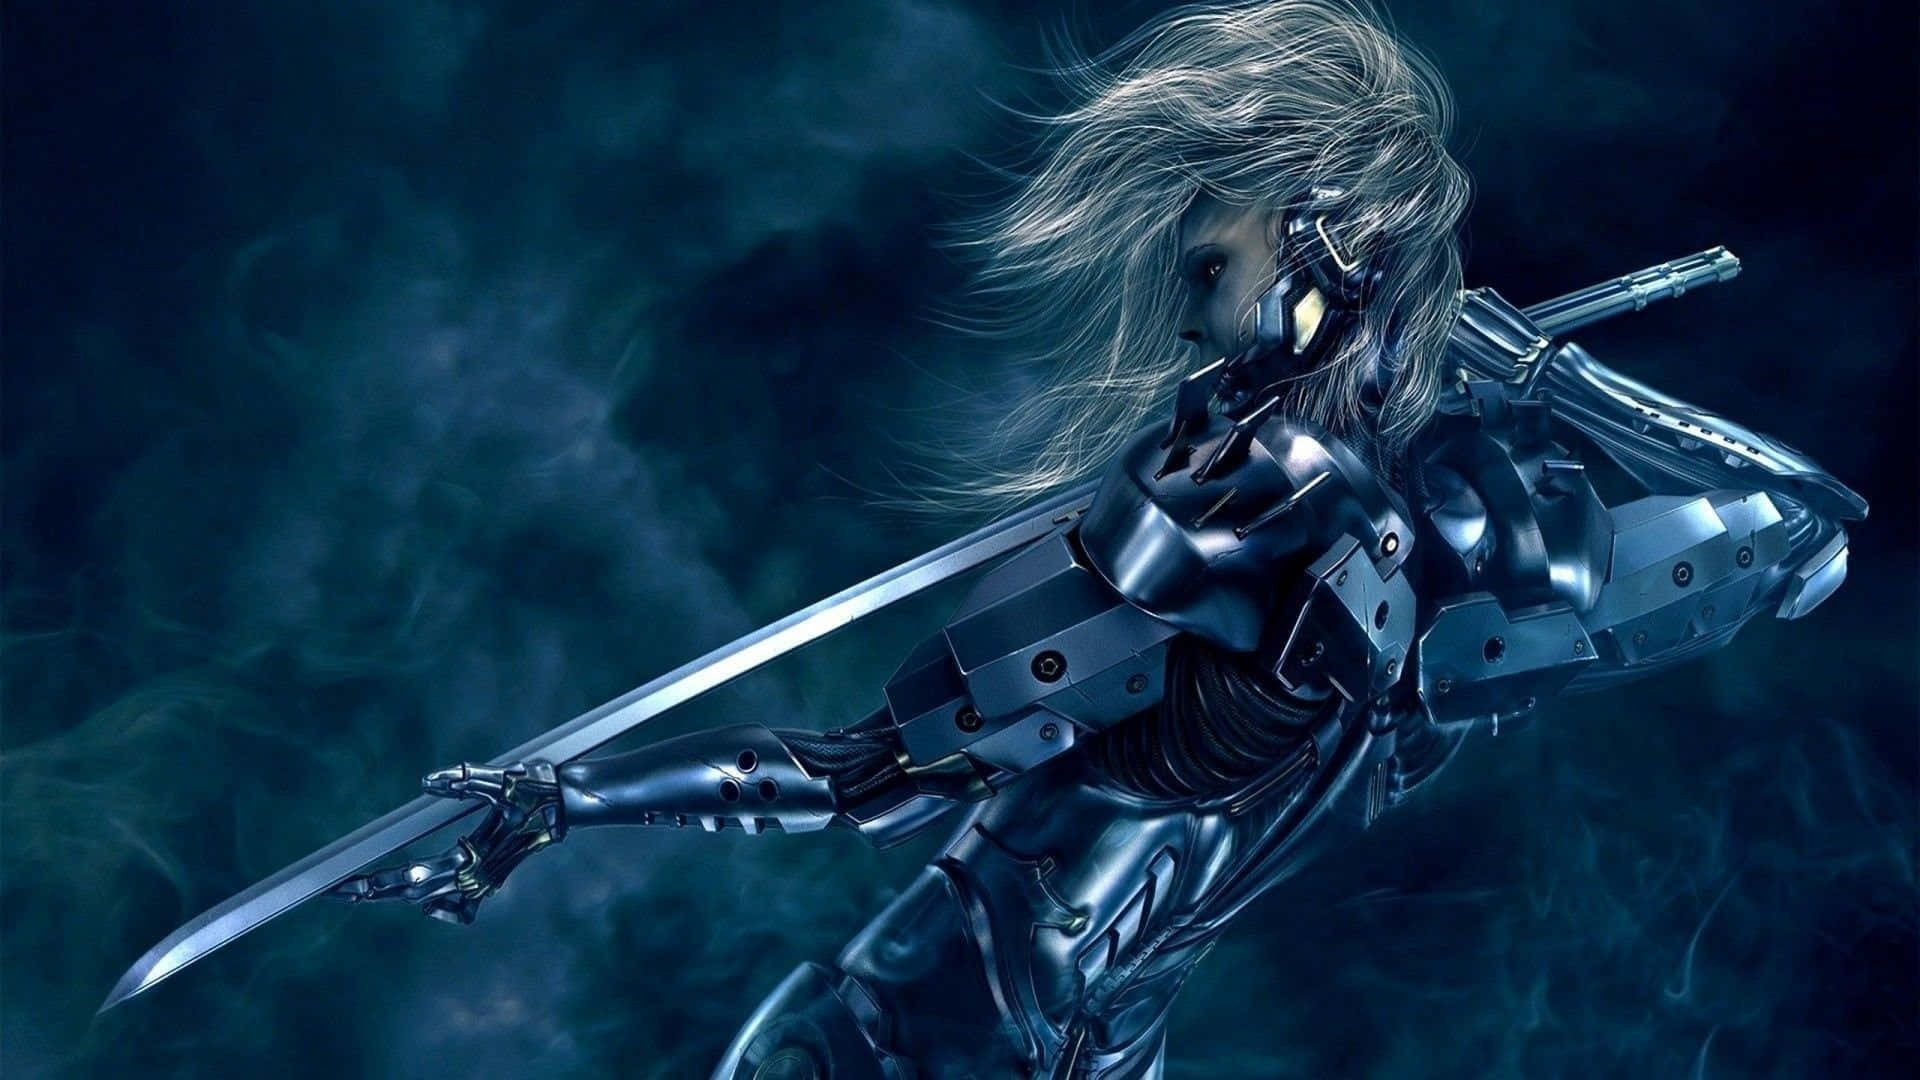 A Woman In A Metal Suit Holding A Sword Wallpaper